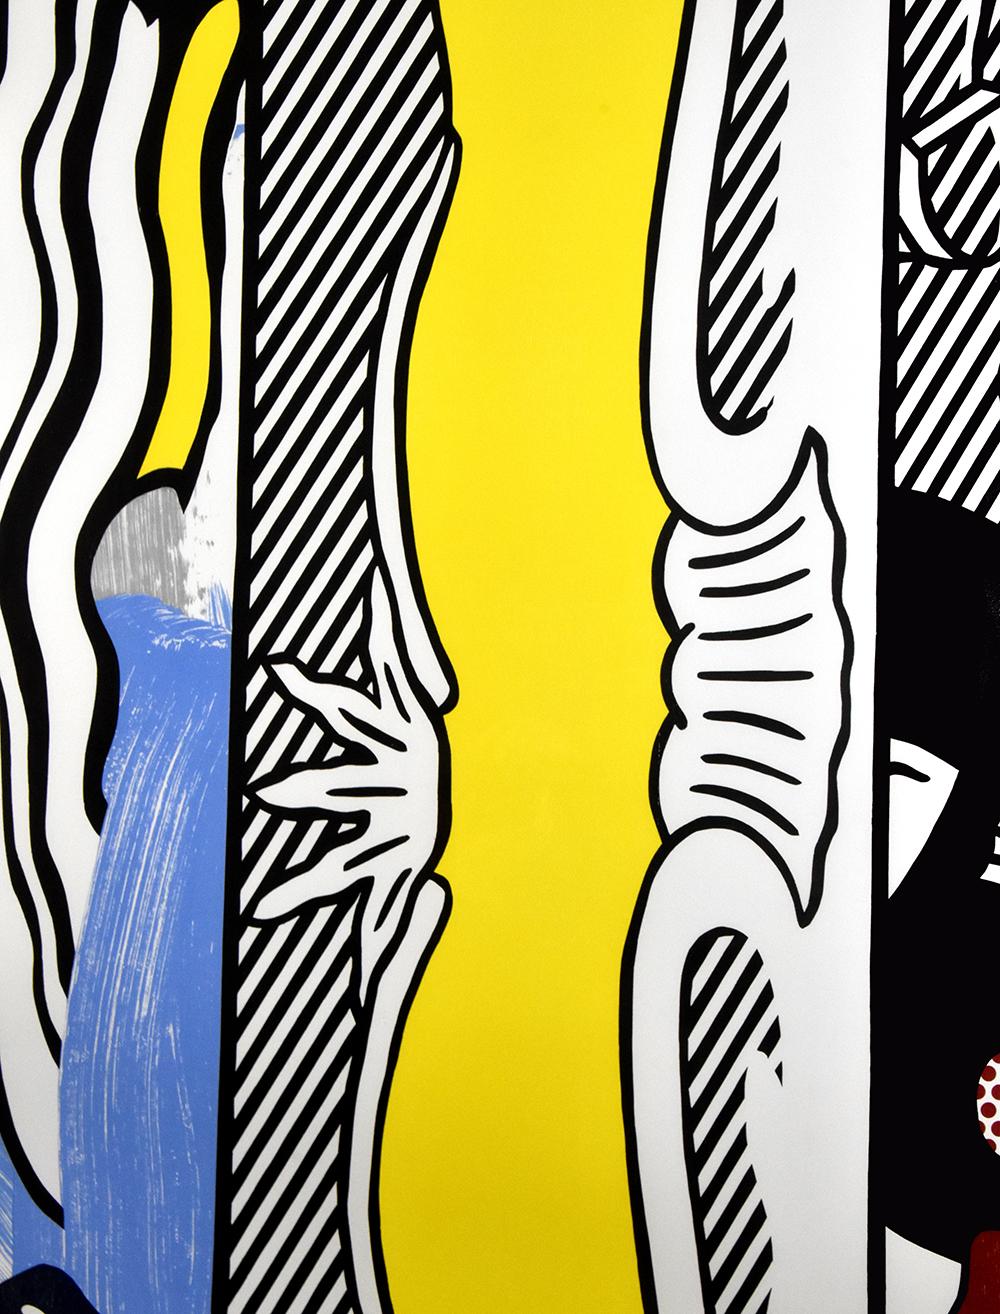 Two Paintings: Dagwood - Yellow Figurative Print by Roy Lichtenstein